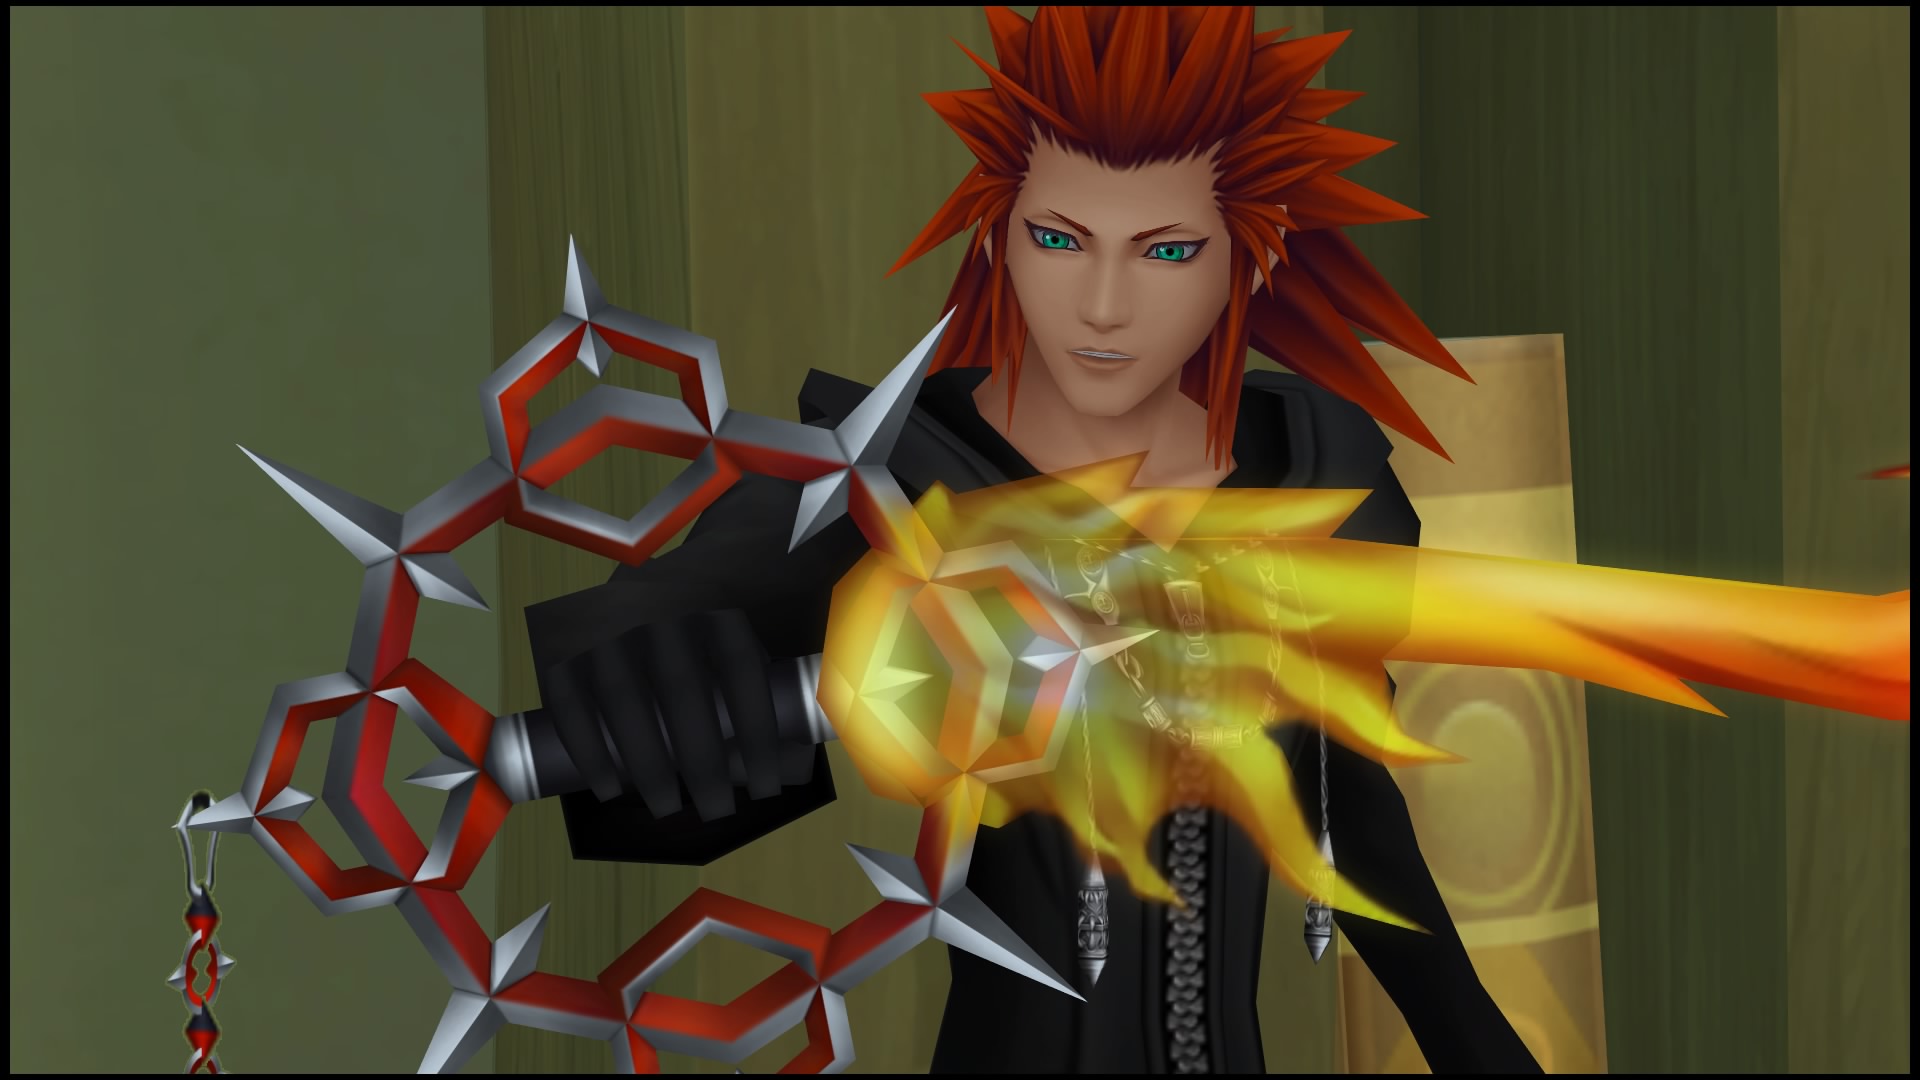 Lea summons a Keyblade after being unable to previously